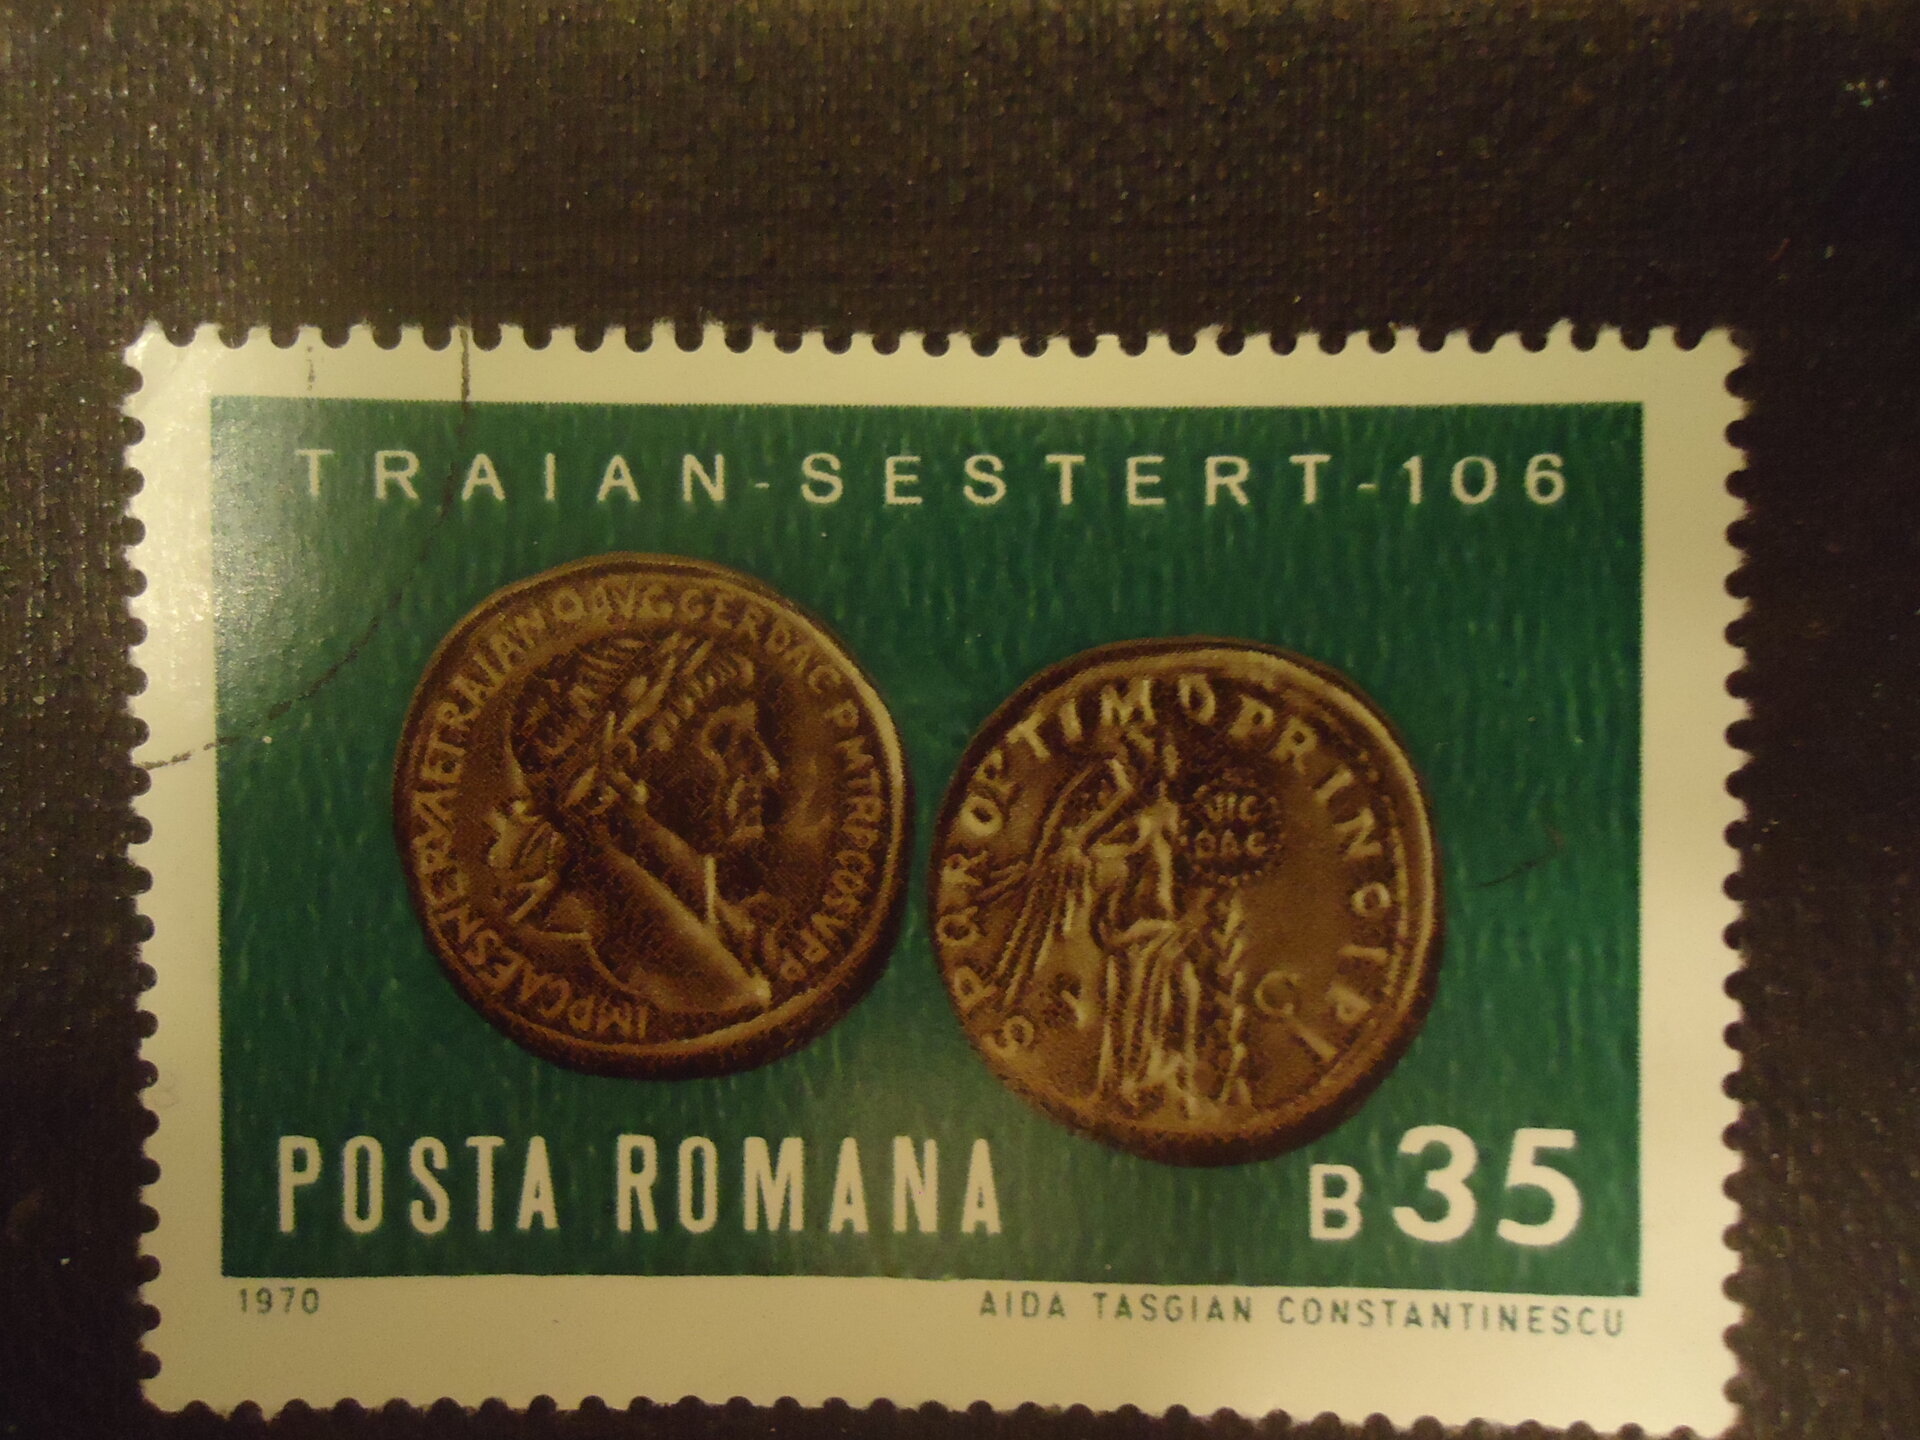 Ancient Coin Stamps Sep 2019 (4).JPG